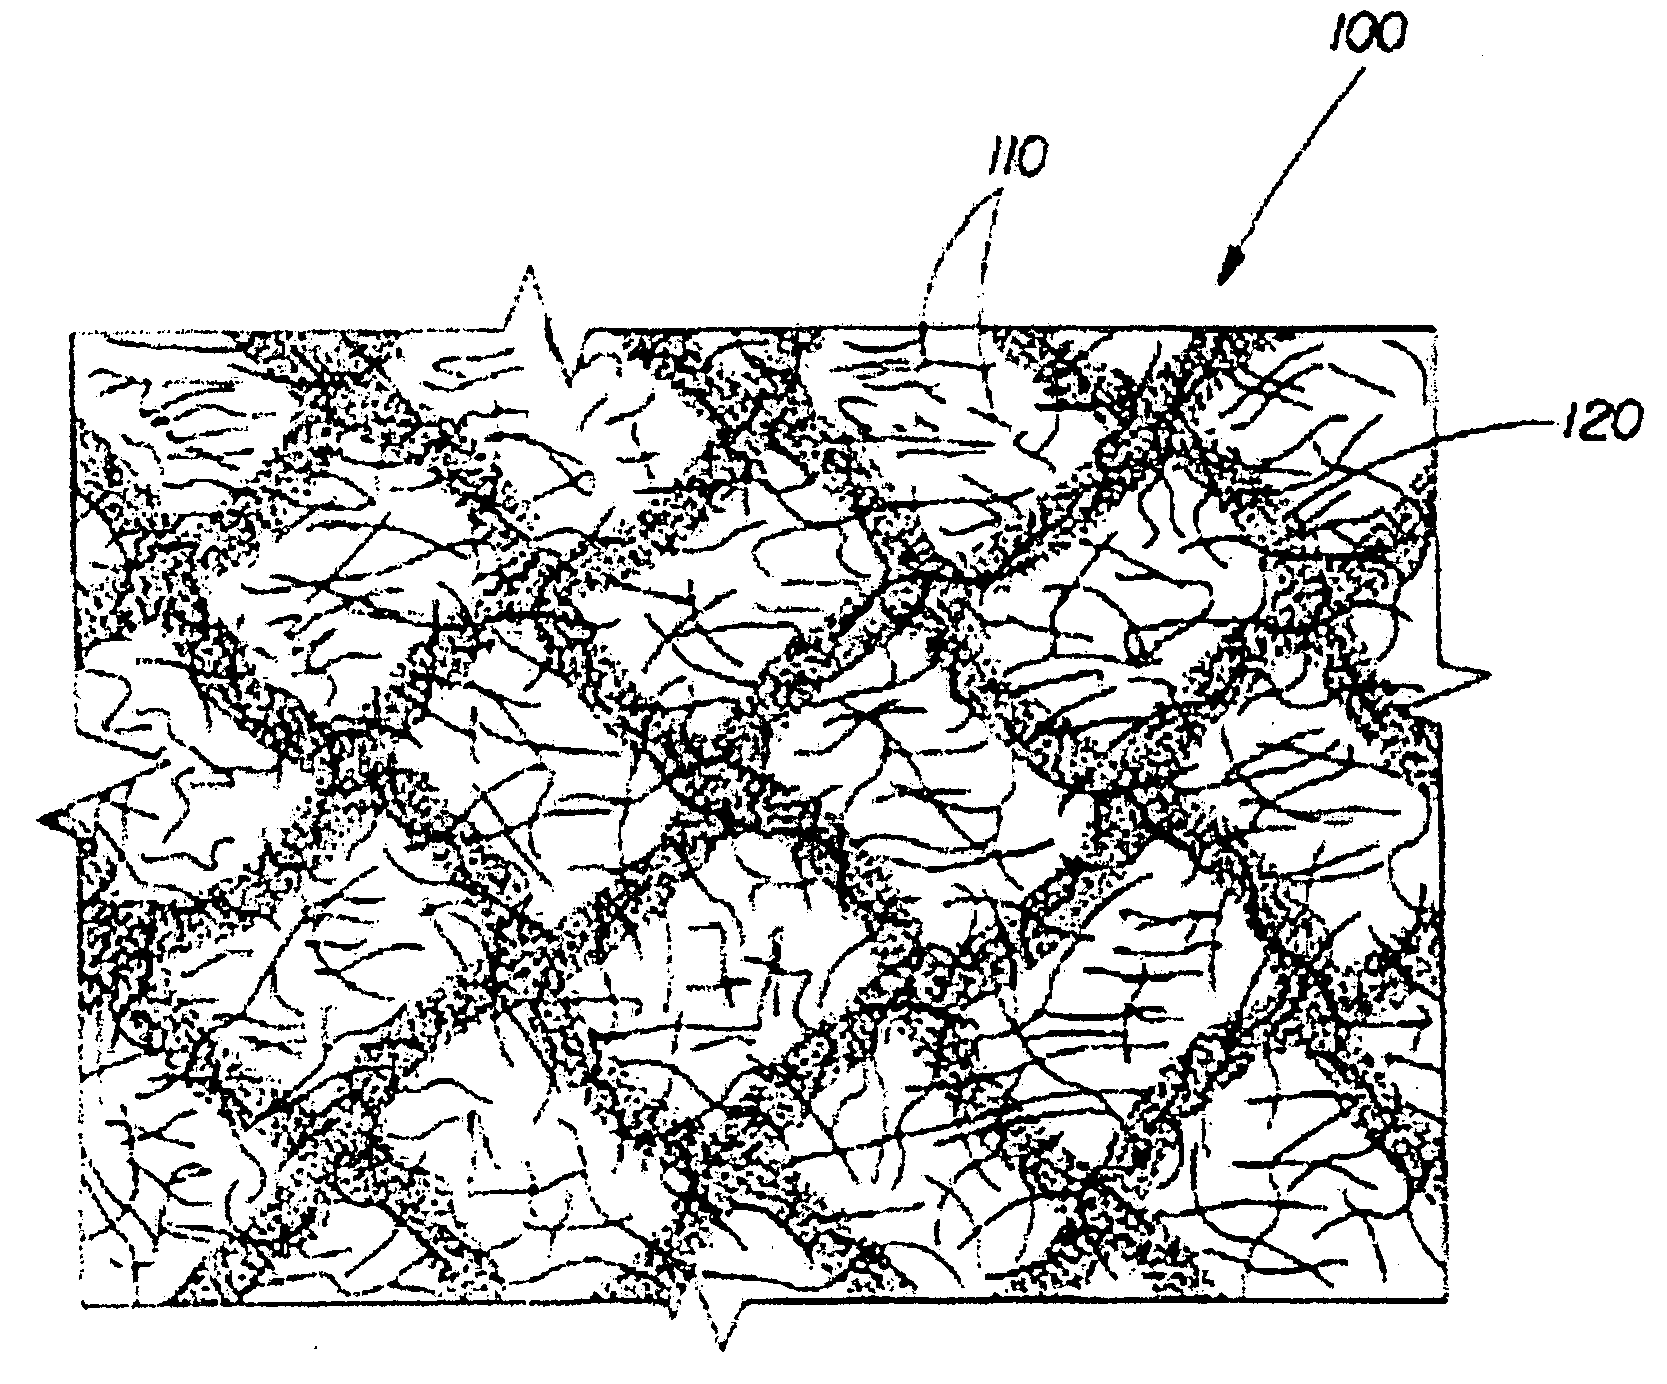 Absorbent article comprising a fibrous structure comprising synthetic fibers and a hydrophilizing agent